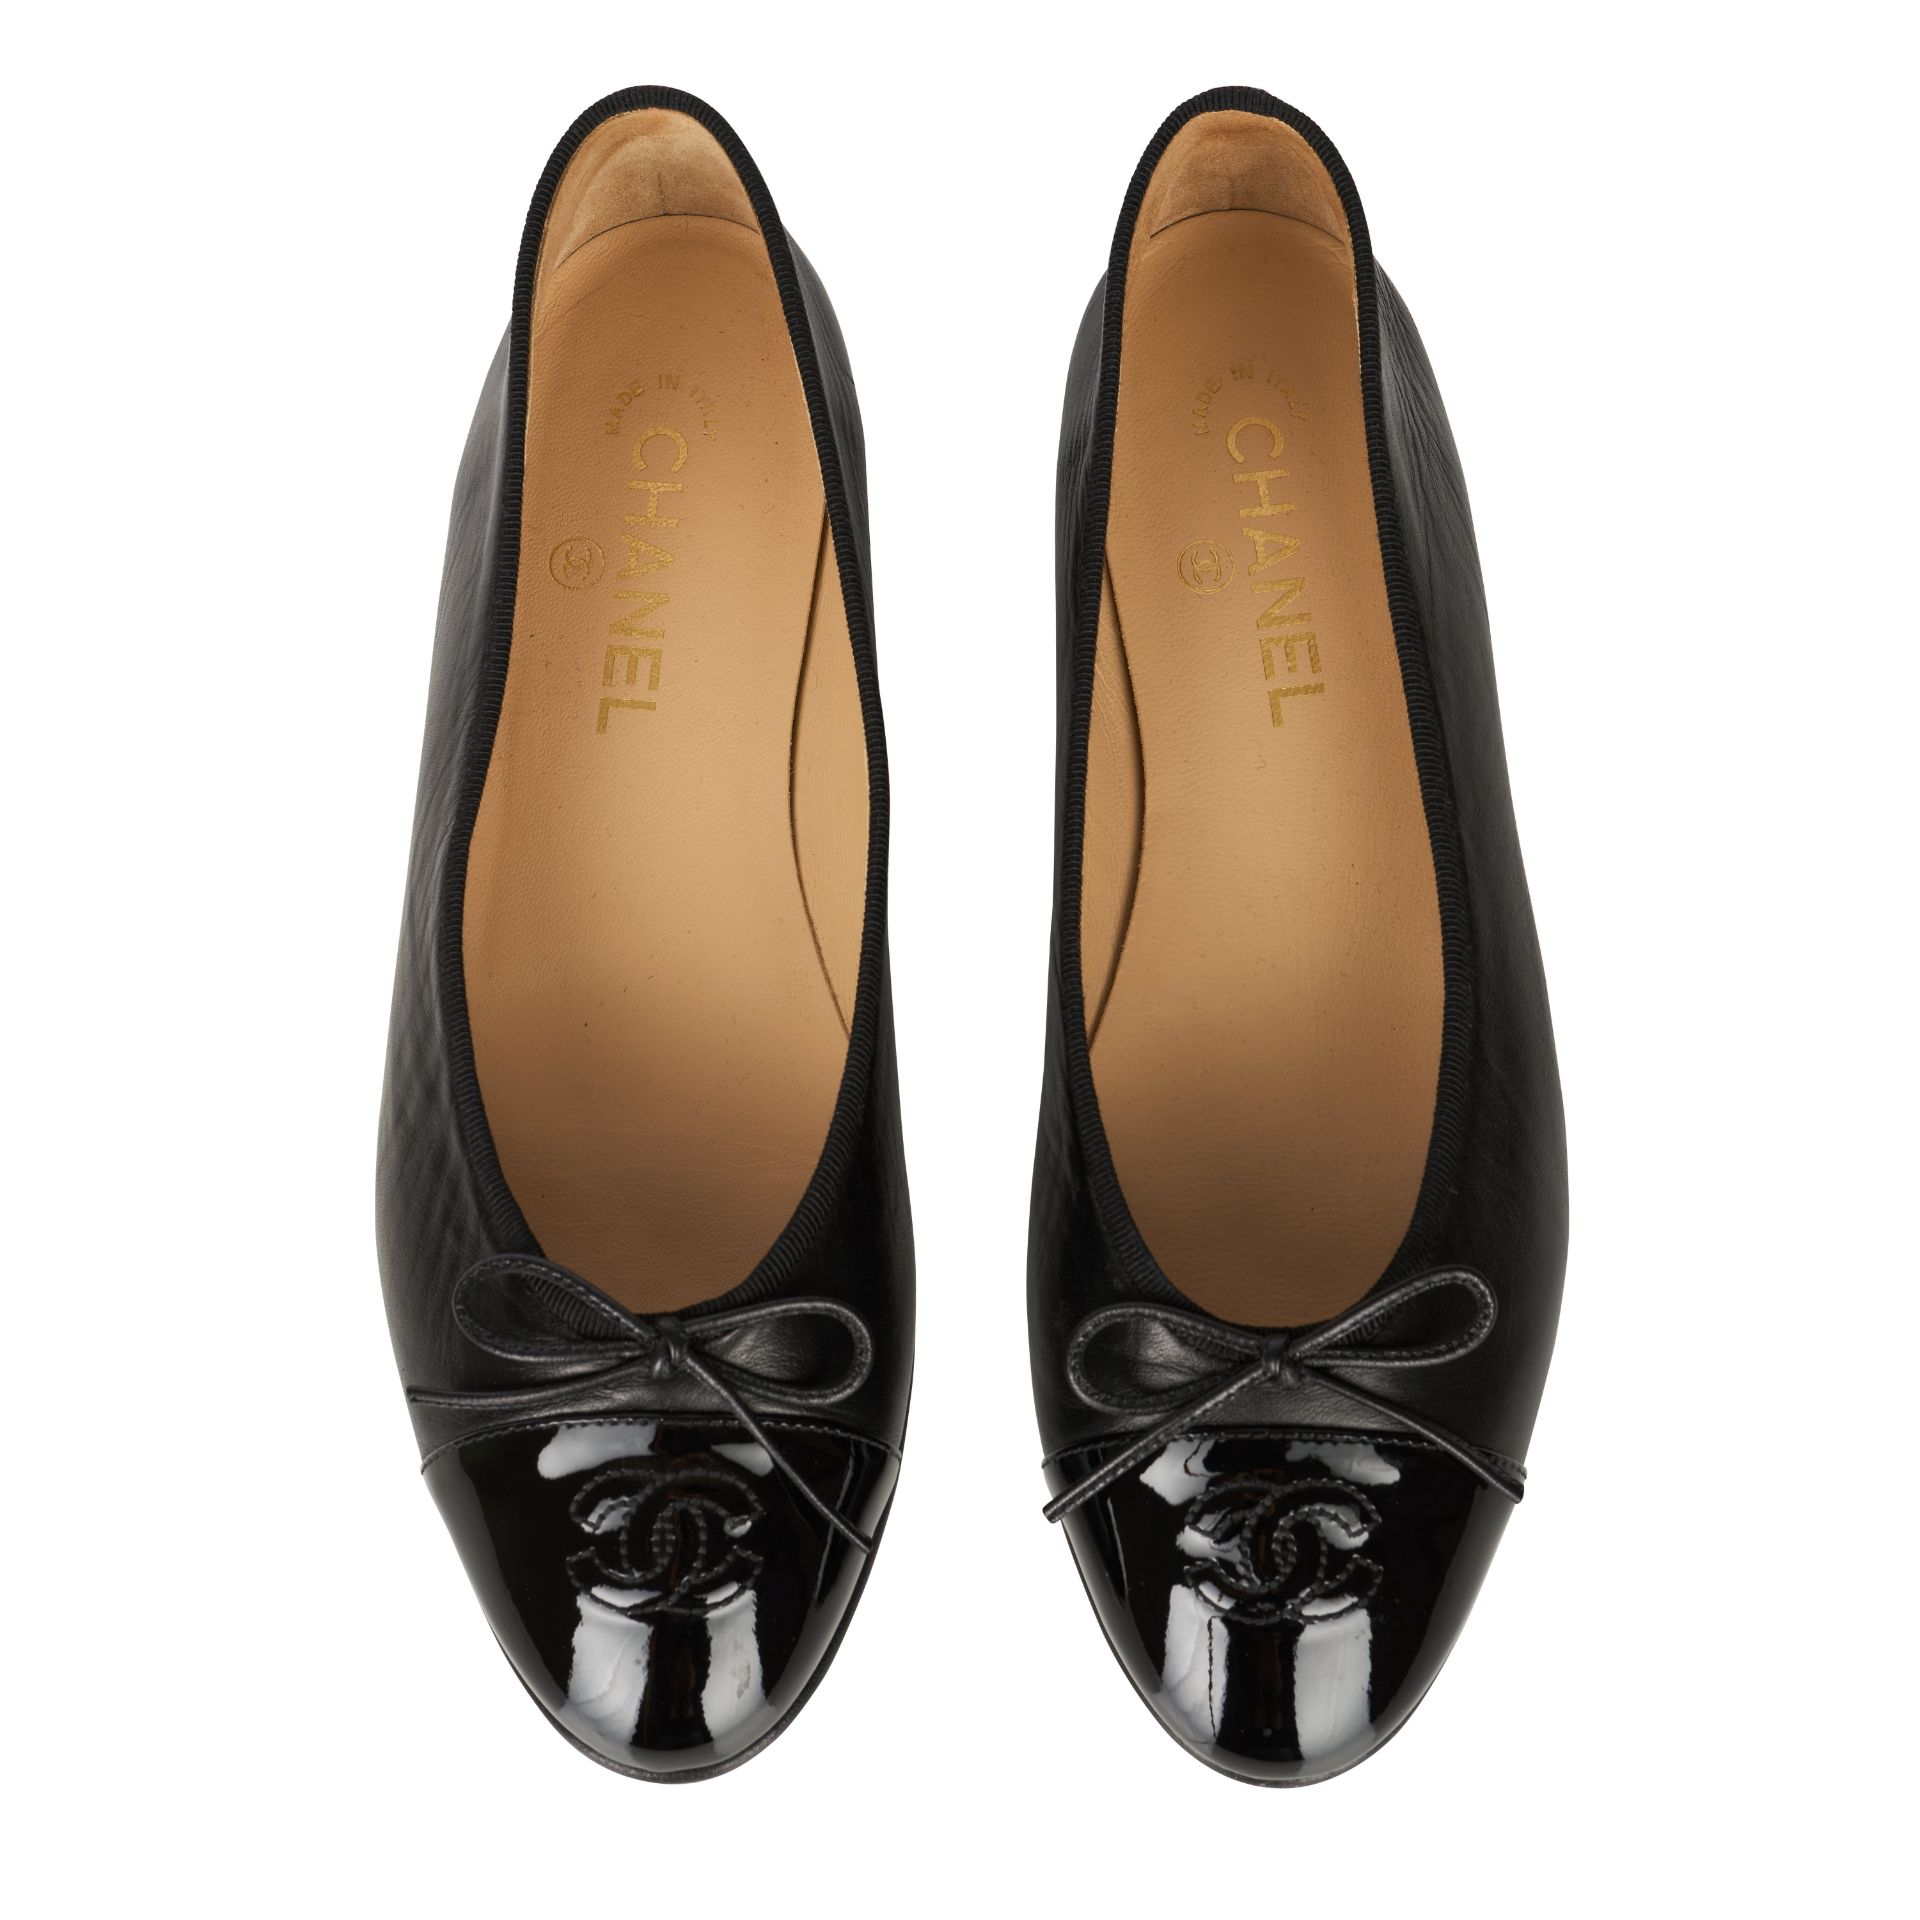 CHANEL BLACK BALLERINA FLATS  Condition grade A-.  Size 39.5. Black leather ballerinas with pat... - Image 3 of 4